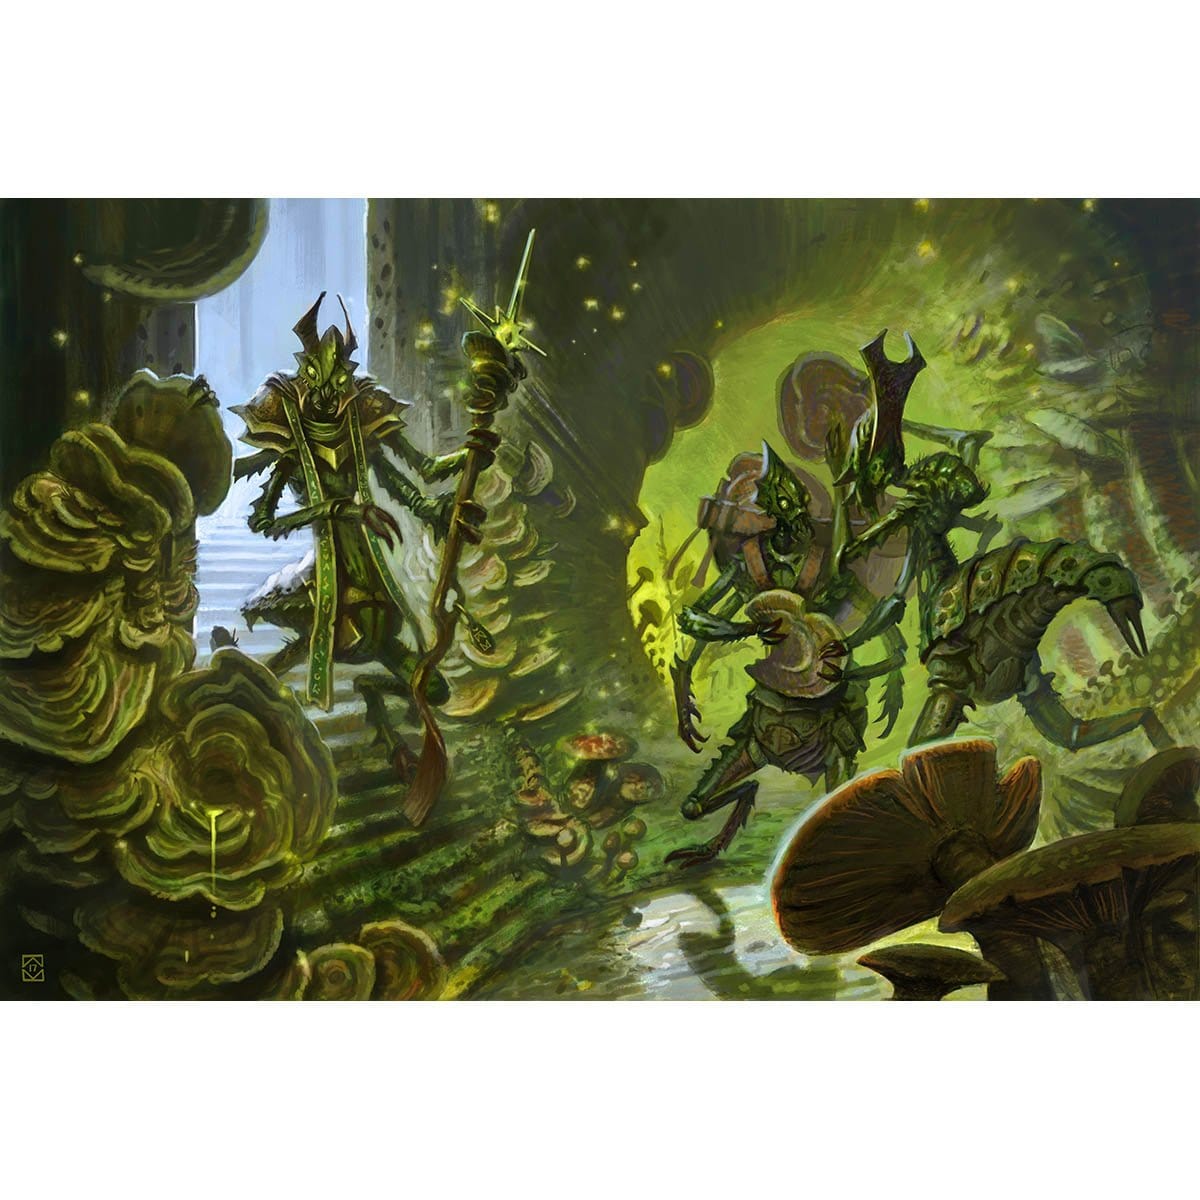 Kraul Foragers Print - Print - Original Magic Art - Accessories for Magic the Gathering and other card games